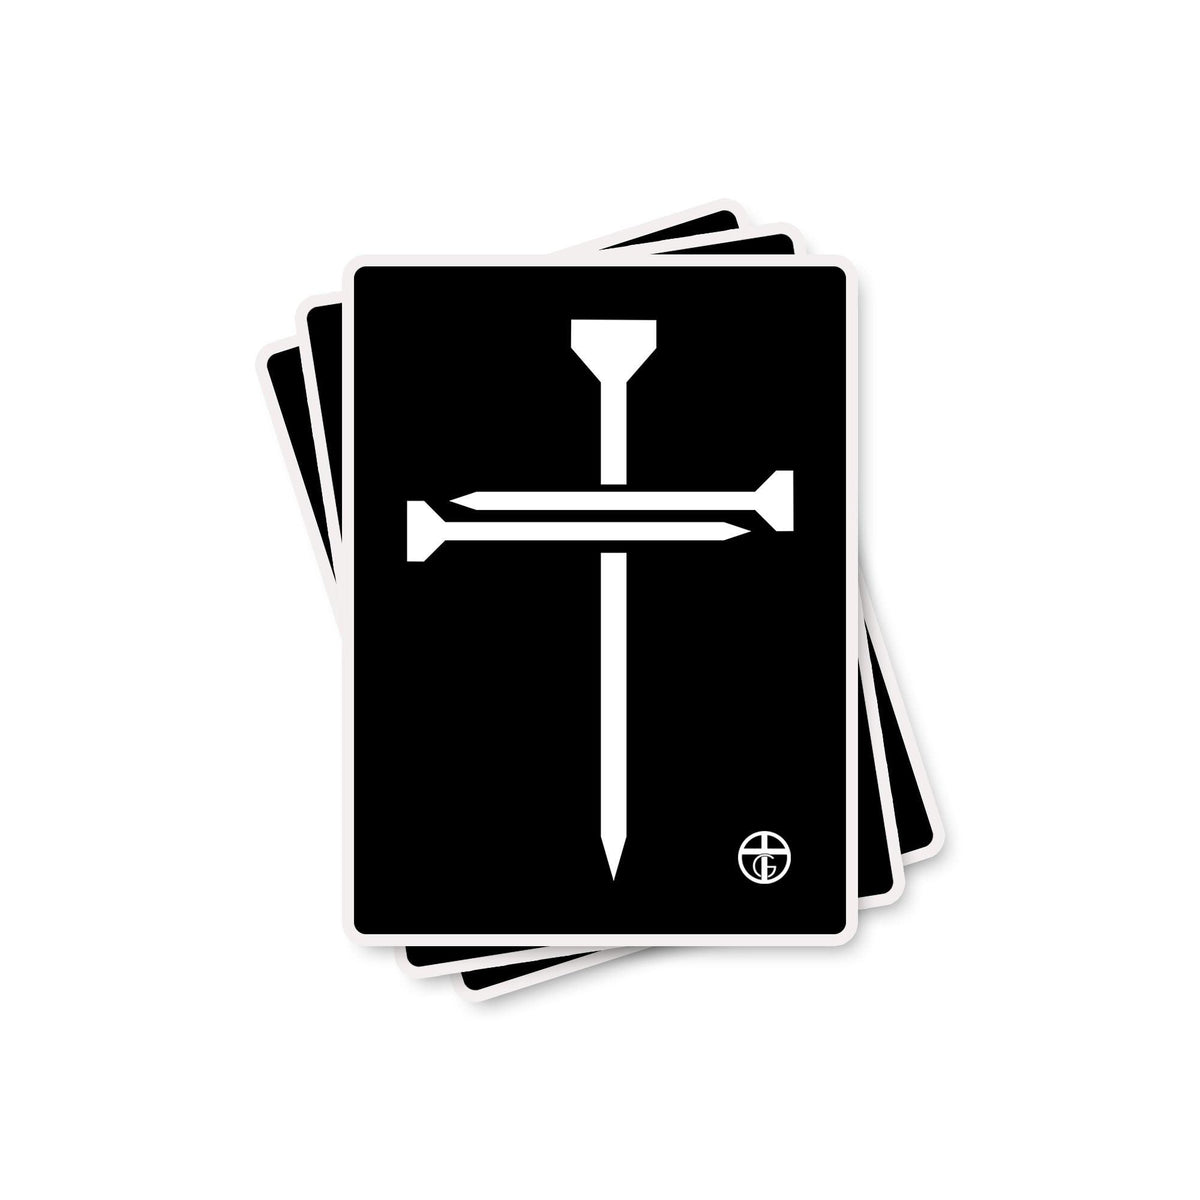 3 Nail Cross Decals